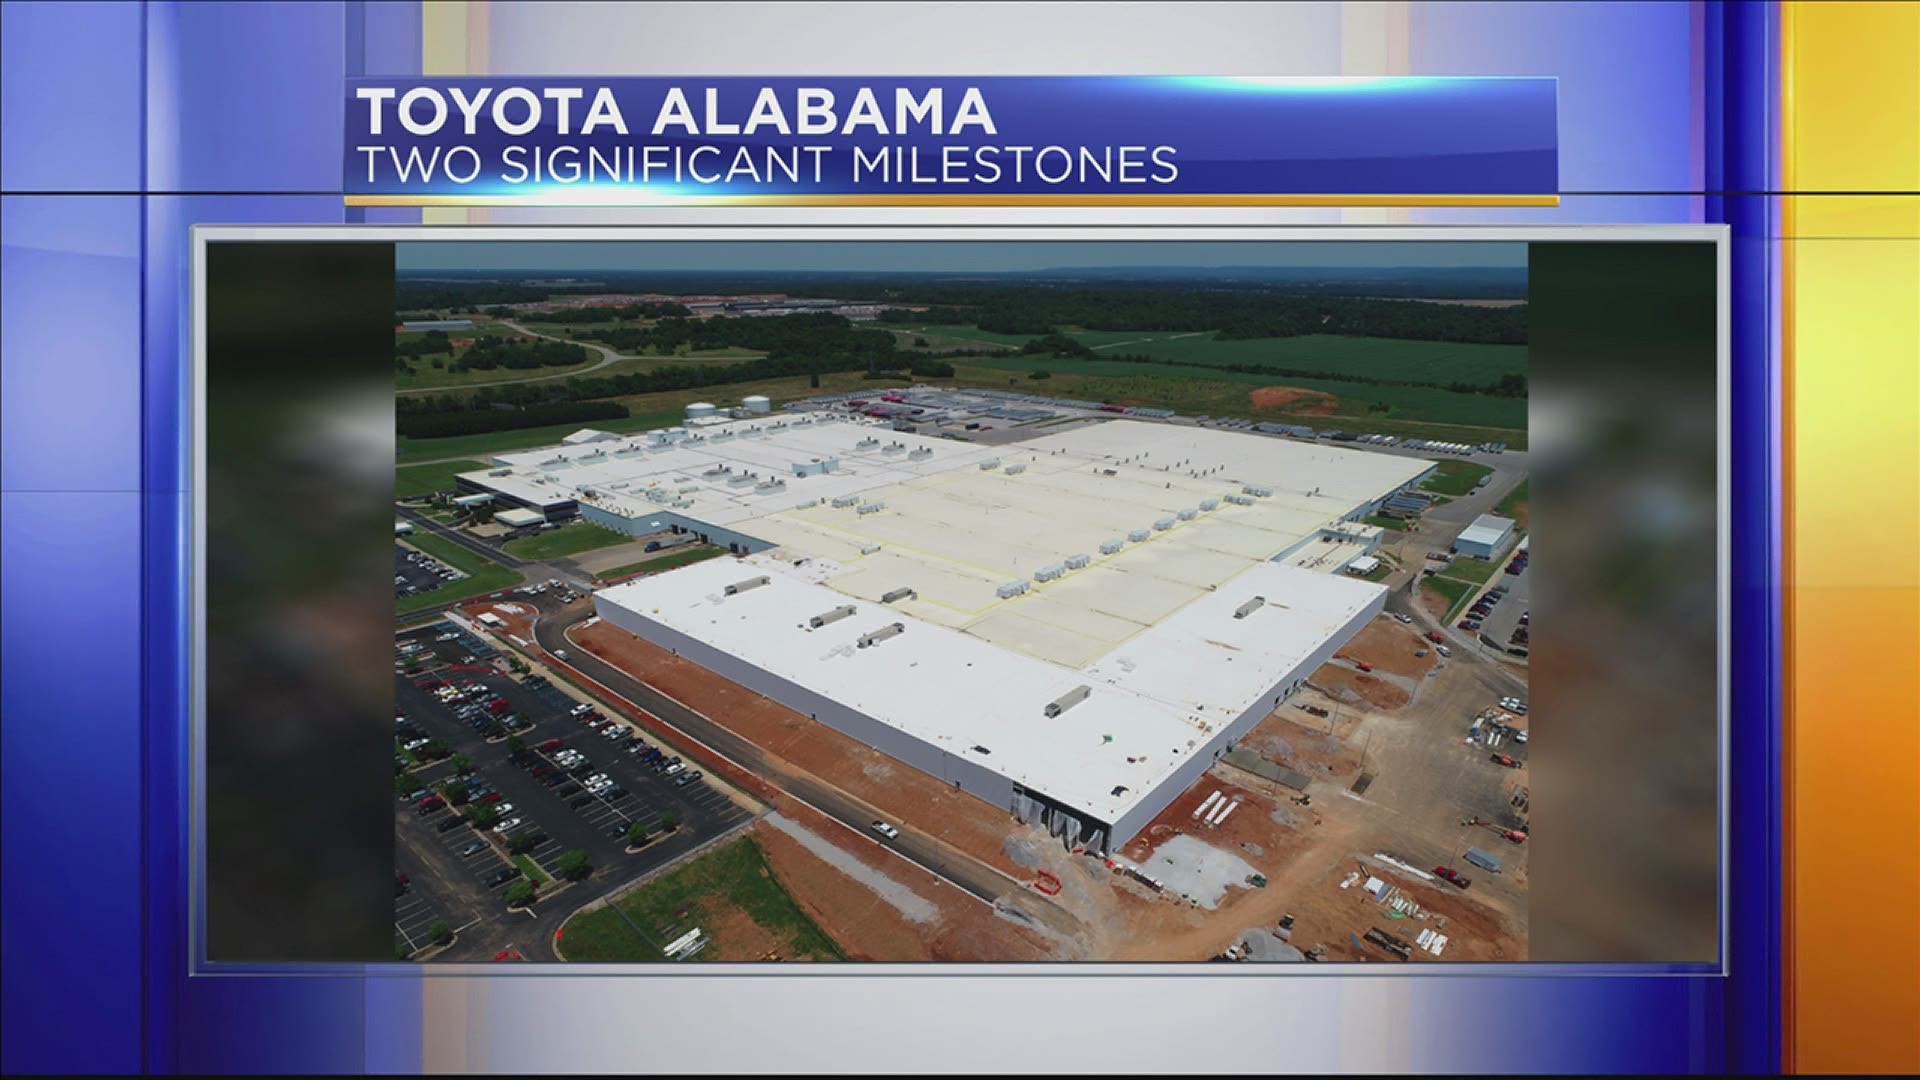 As of July 8, Toyota has committed nearly $9 billion of the announced total.